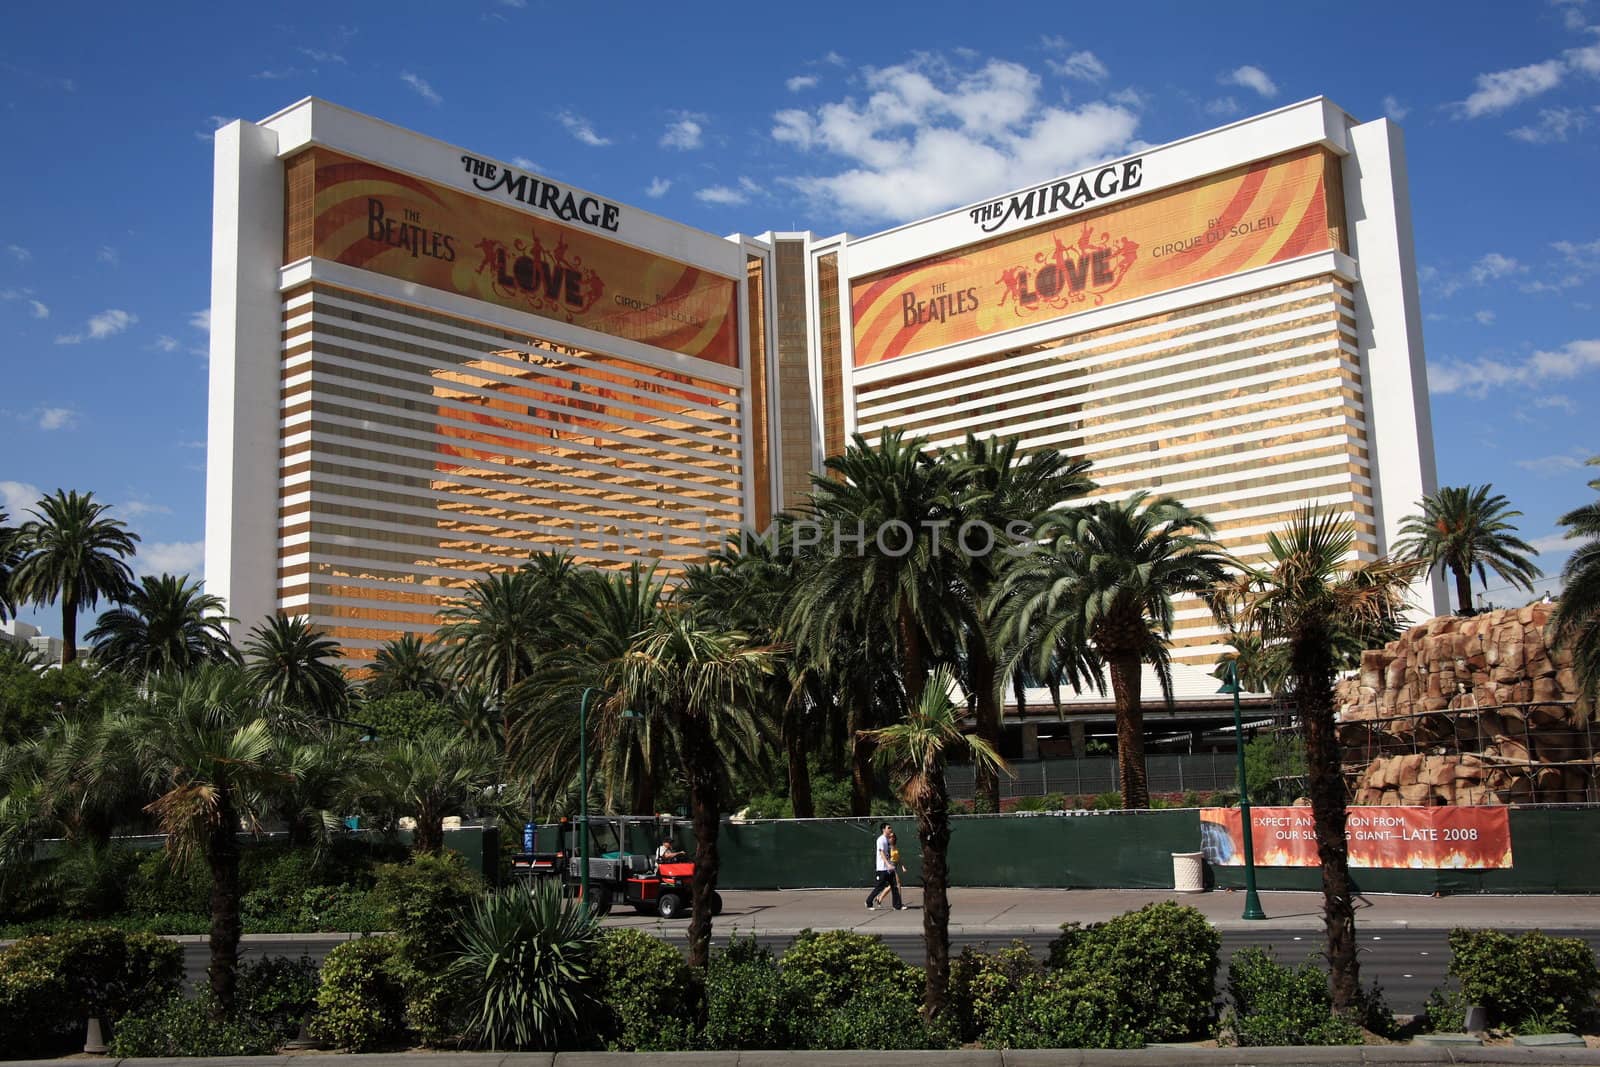 Towers of the Mirage Hotel on the Las Vegas Strip in Nevada